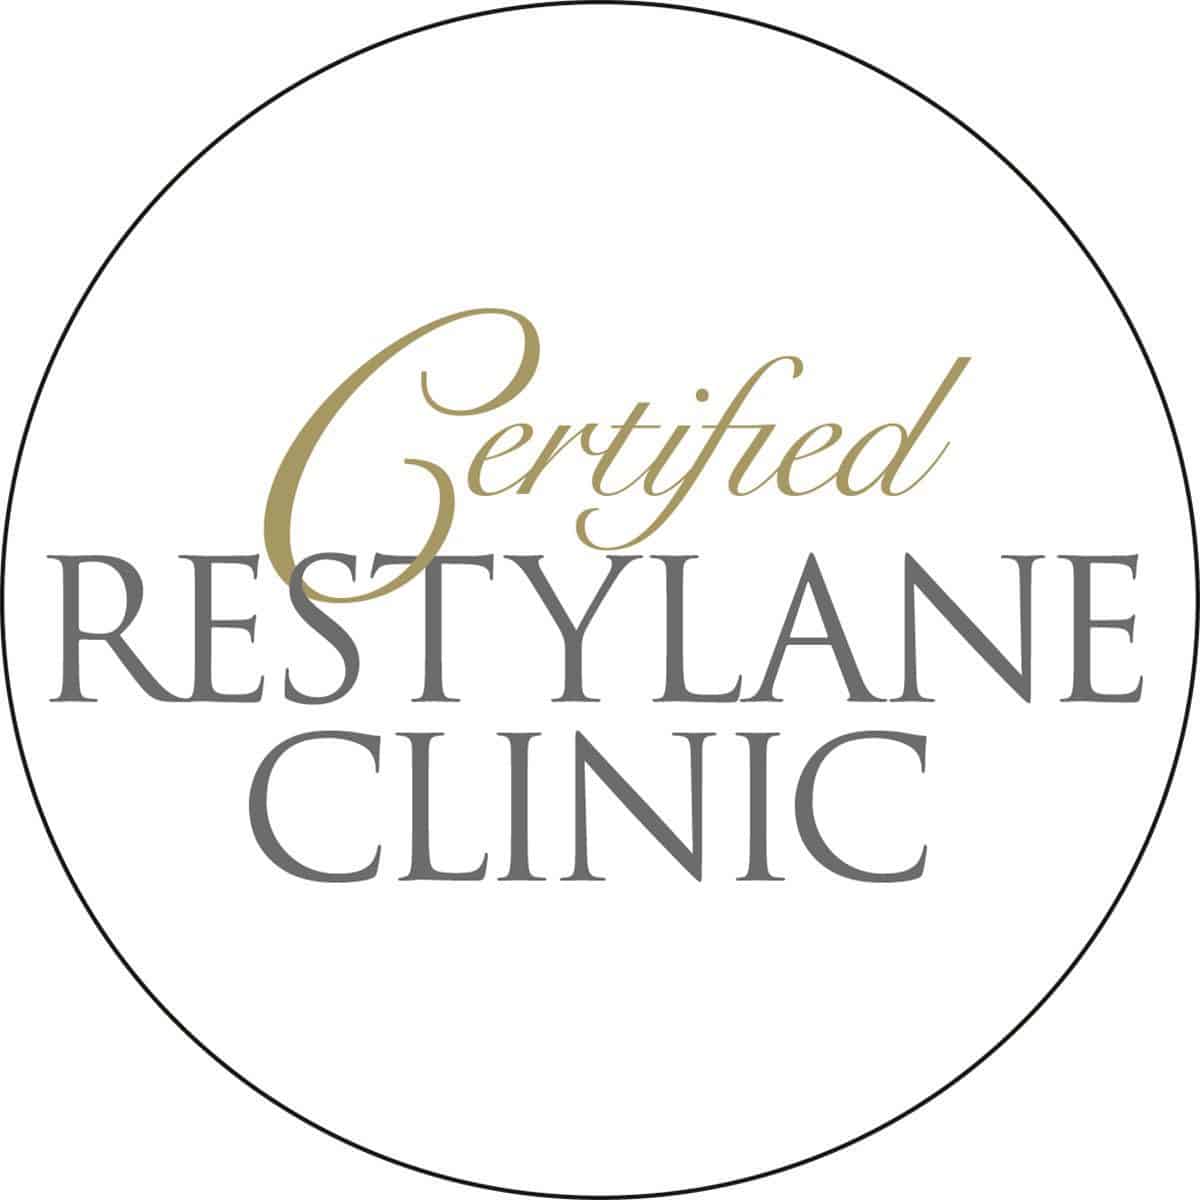 Certified-Clinic-1200